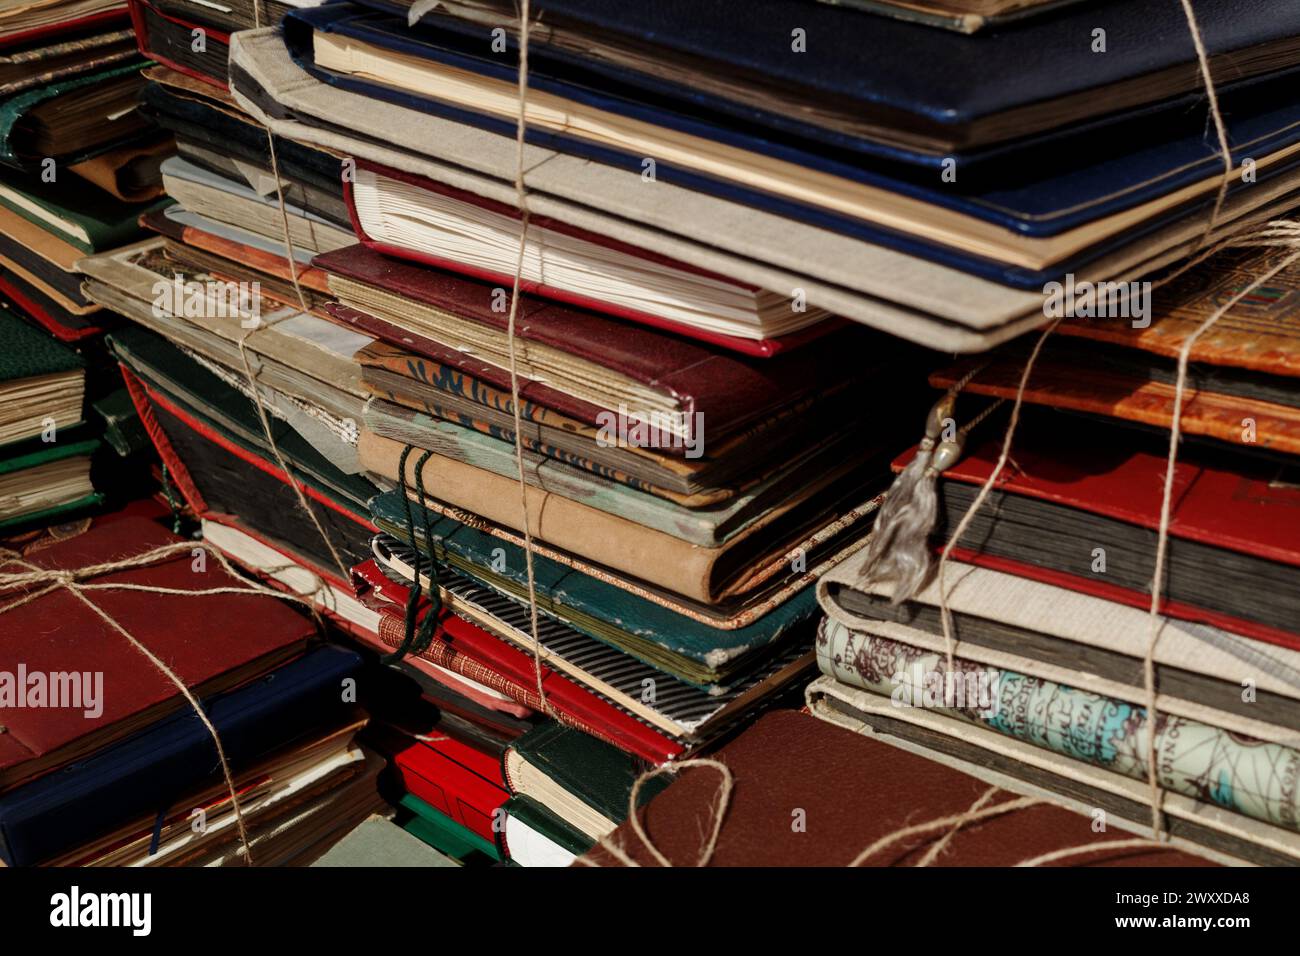 A collection of old and worn books bound with twine, stacked in a haphazard fashion. Stock Photo